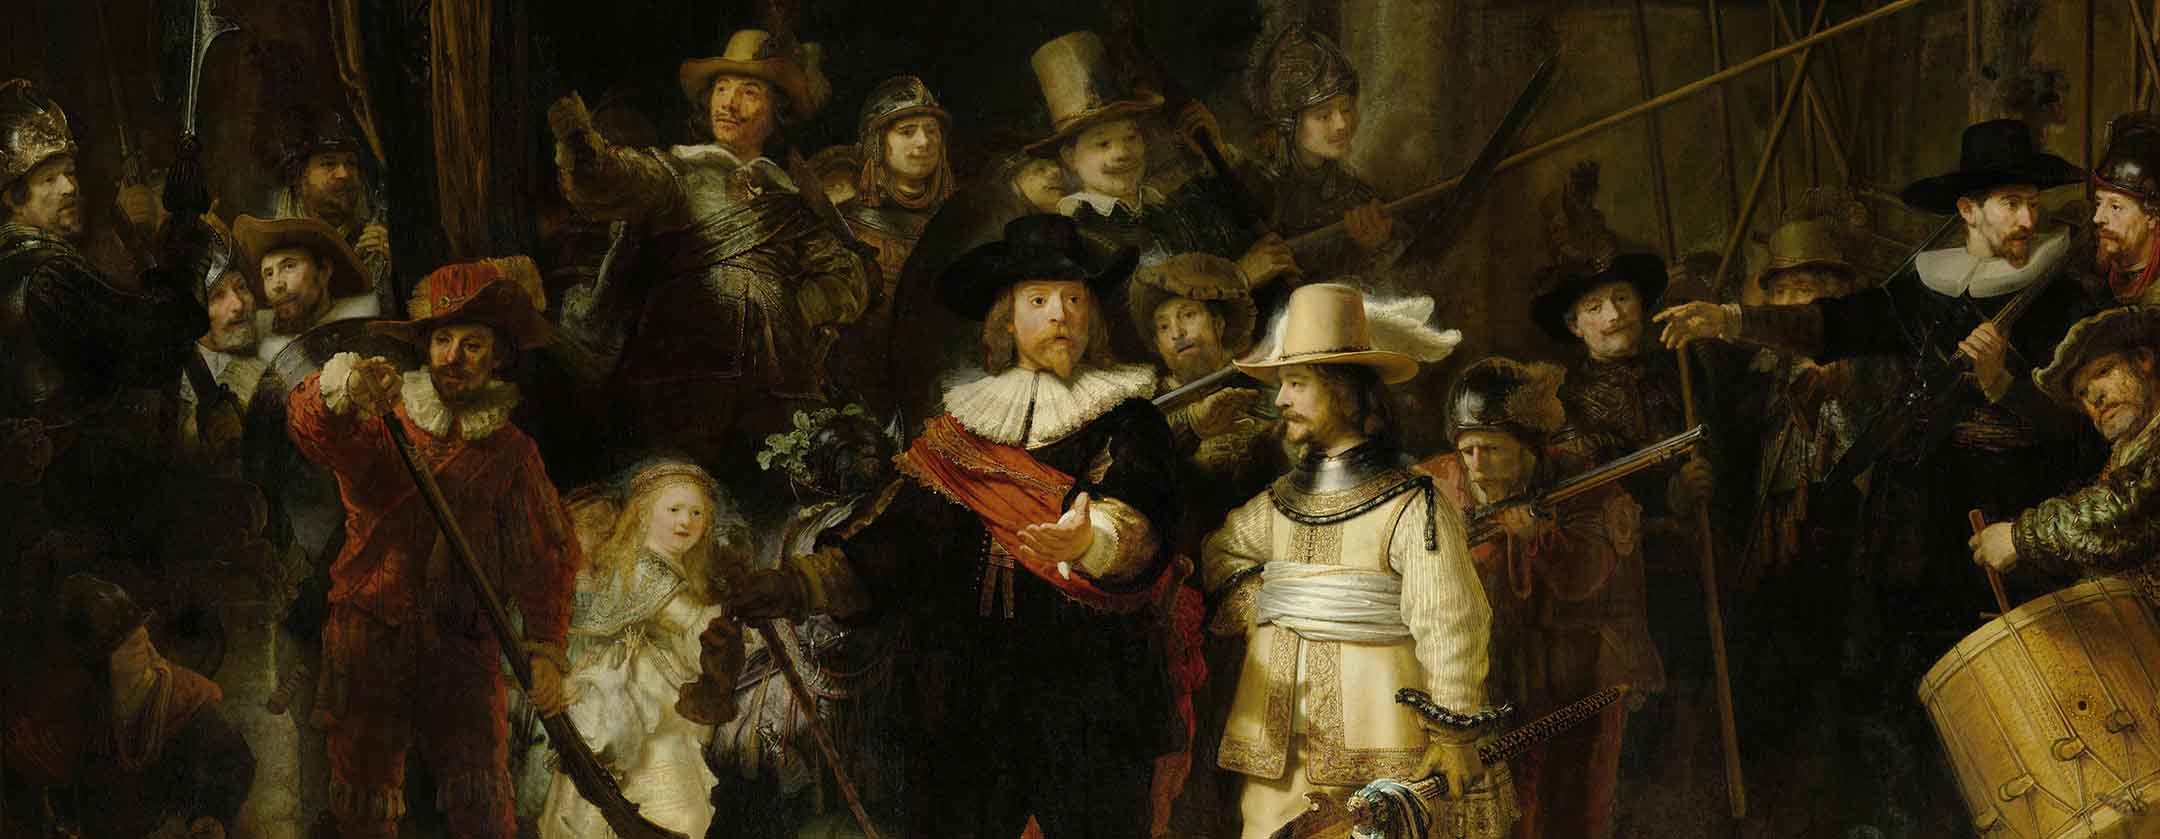 Rembrandt The Nightwatch By Rembrandt